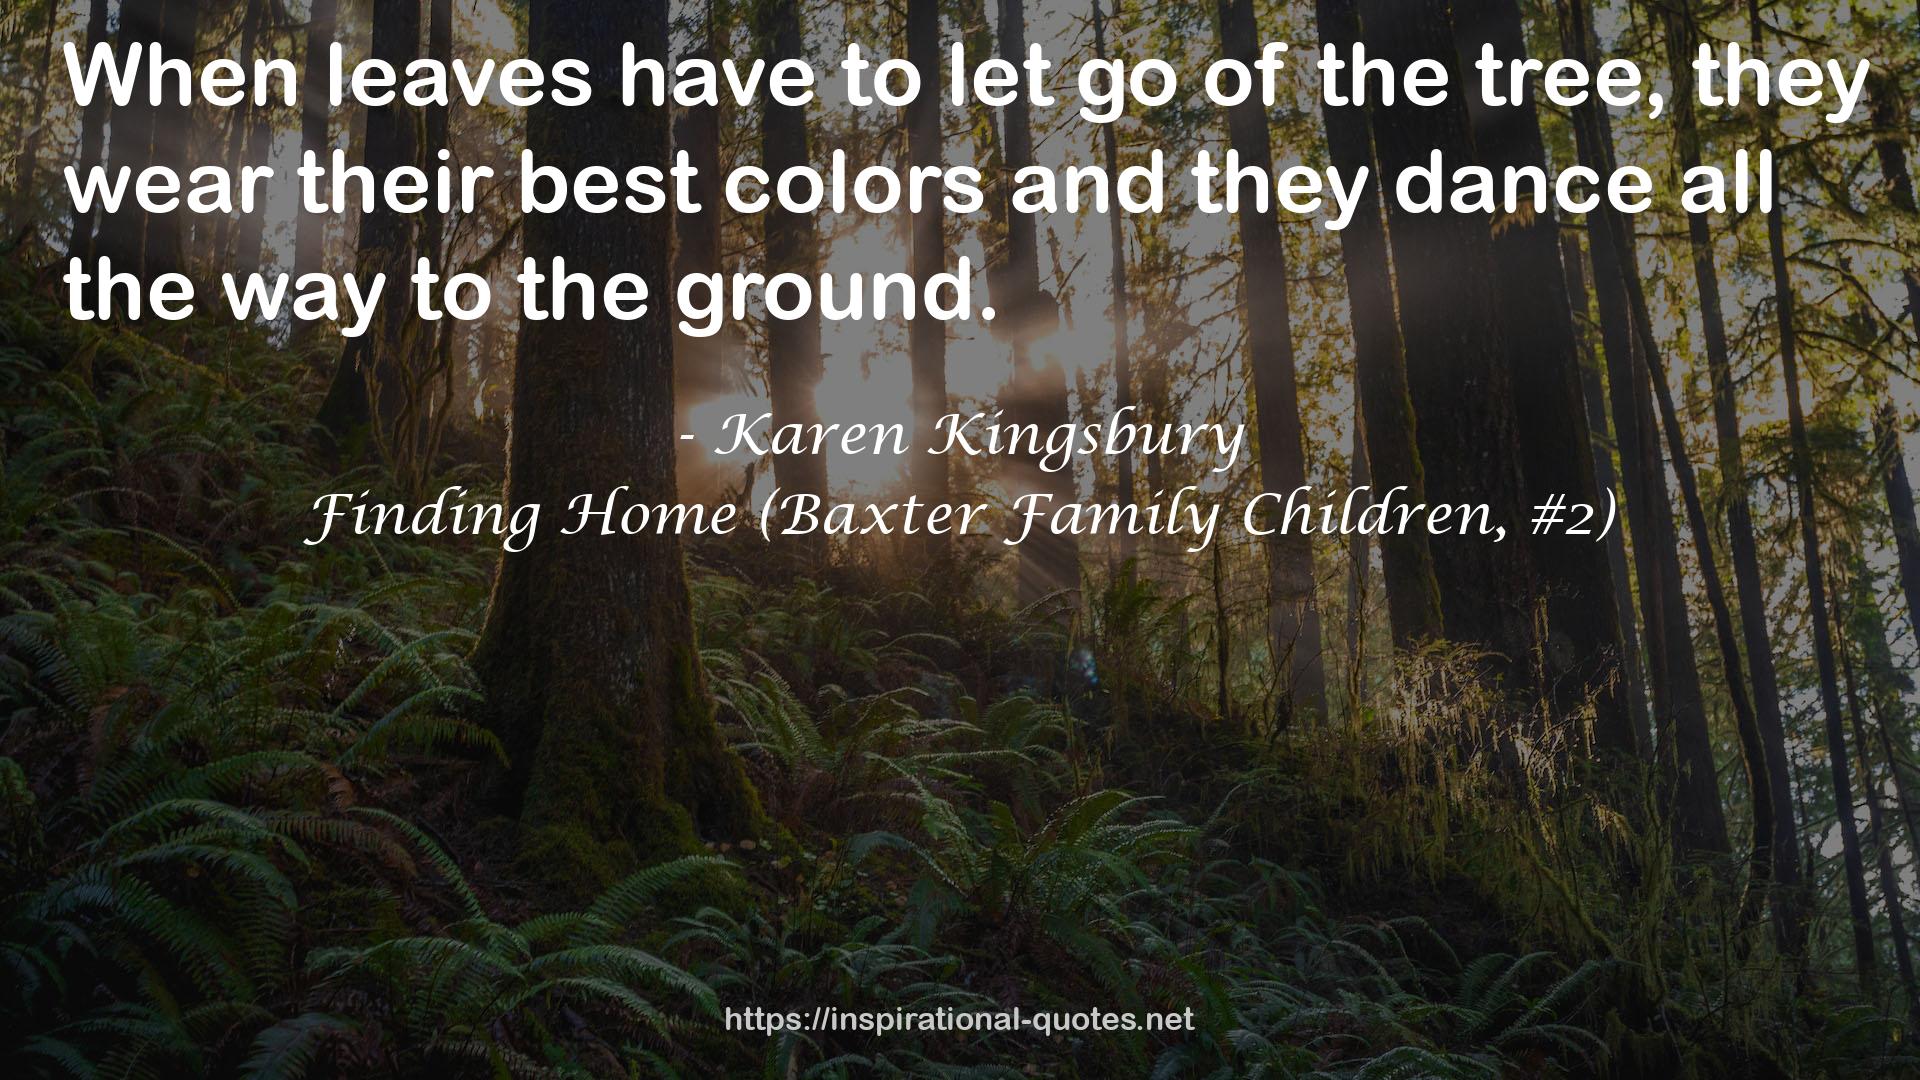 Finding Home (Baxter Family Children, #2) QUOTES